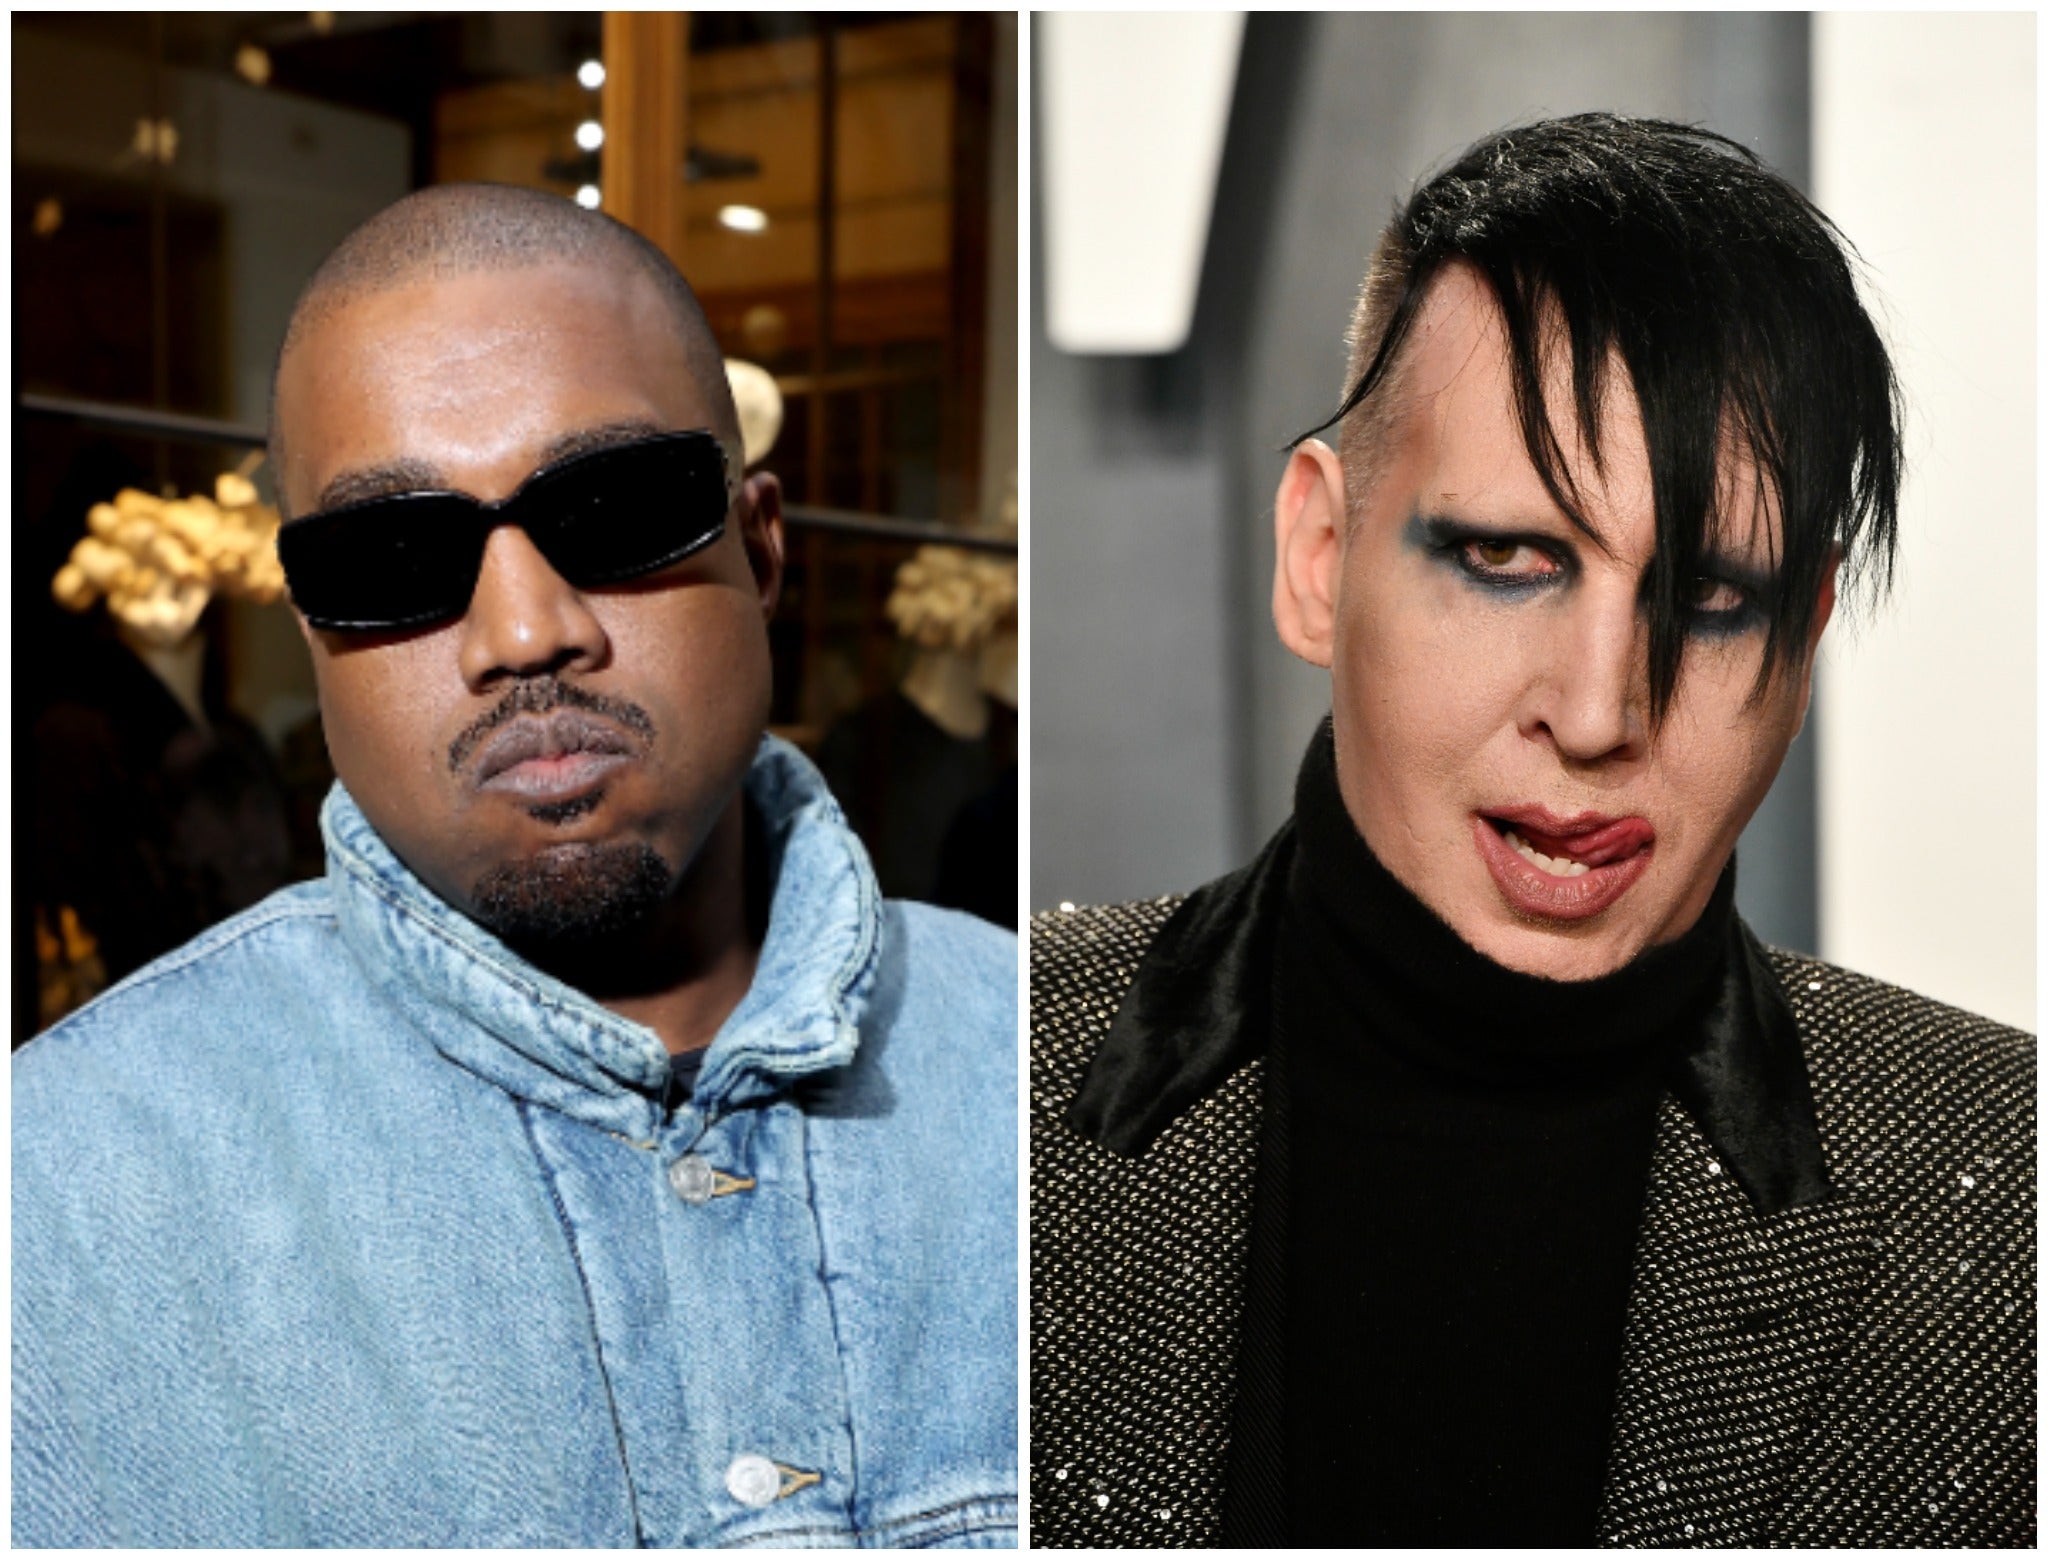 Kanye West has collaborated with Marilyn Manson for his ‘Donda 2’ event